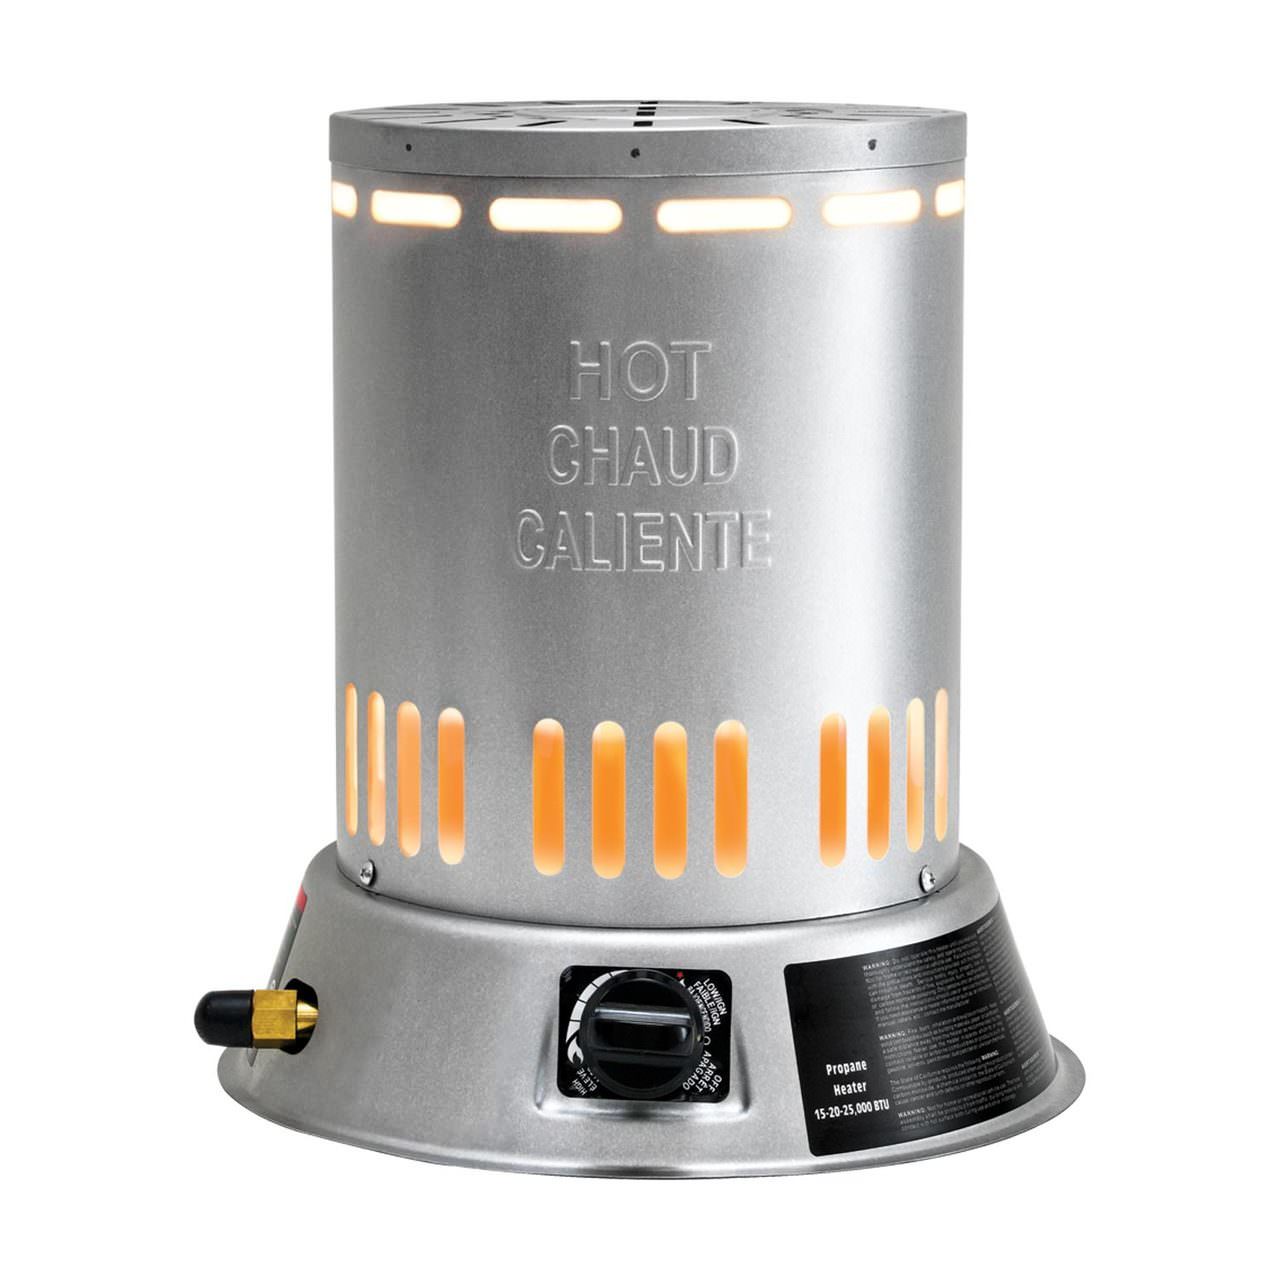 DH Propane Convection Heater